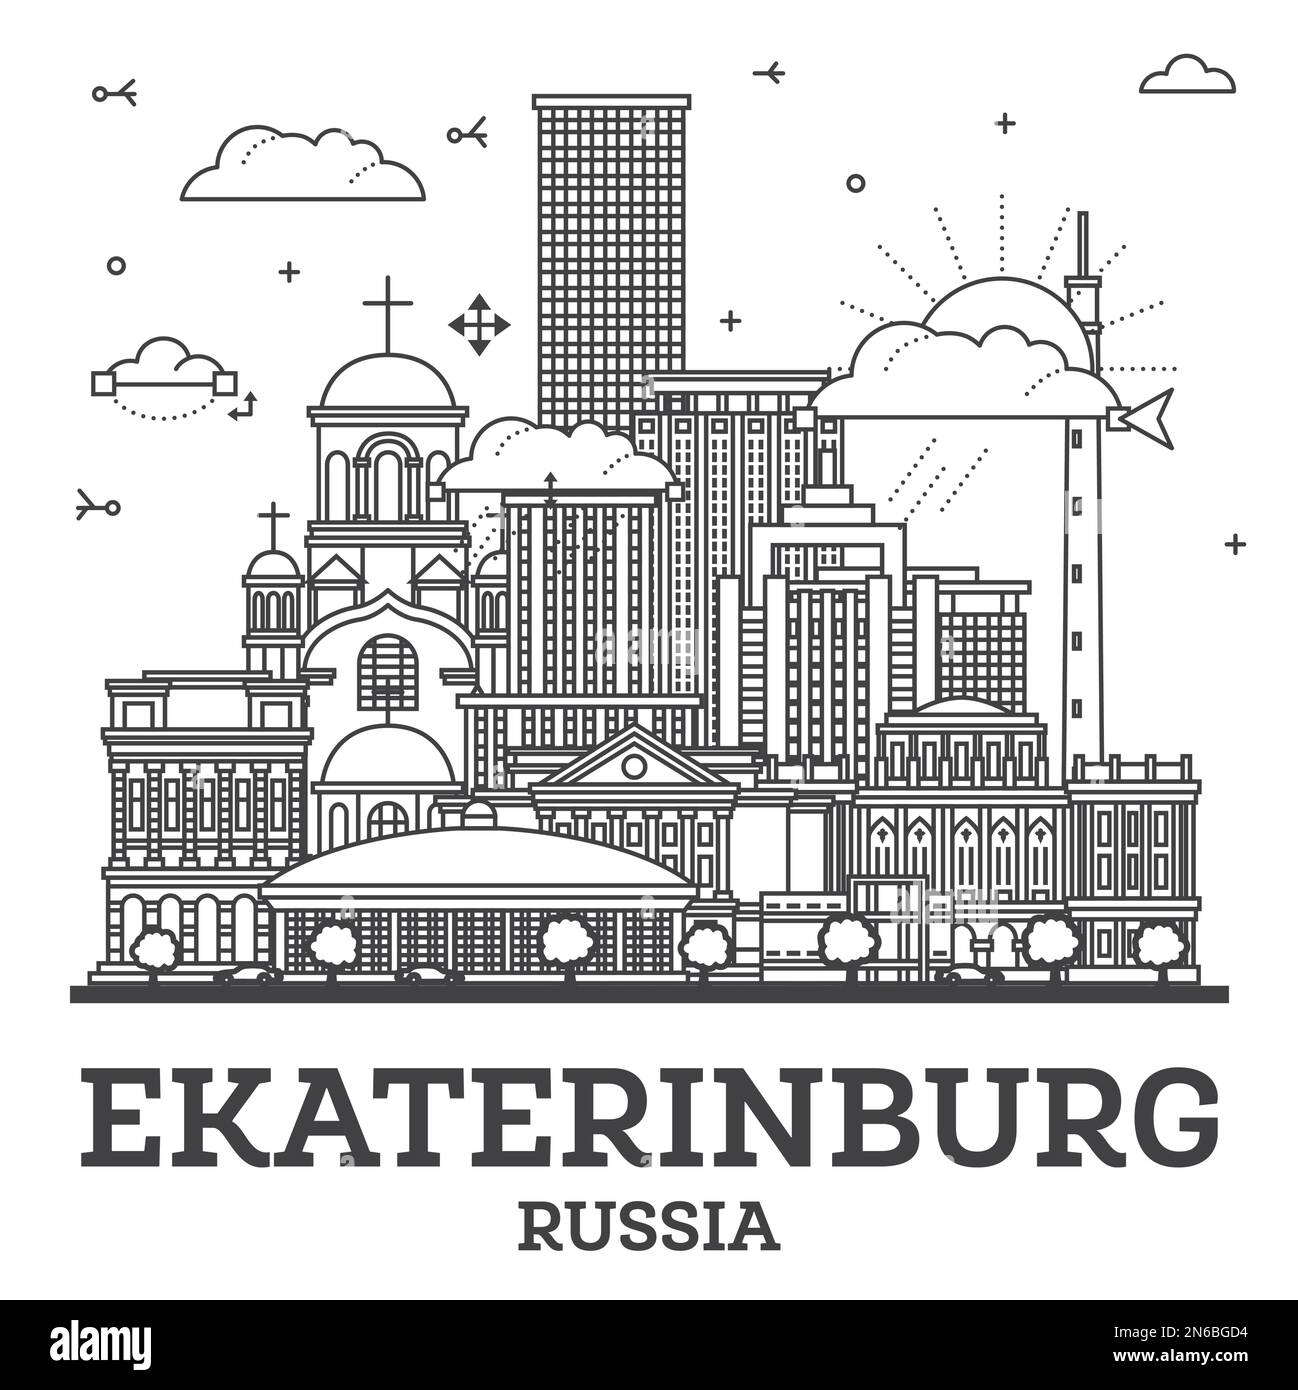 Outline Yekaterinburg Russia City Skyline with Modern Buildings Isolated on White. Vector Illustration. Yekaterinburg Cityscape with Landmarks. Stock Vector